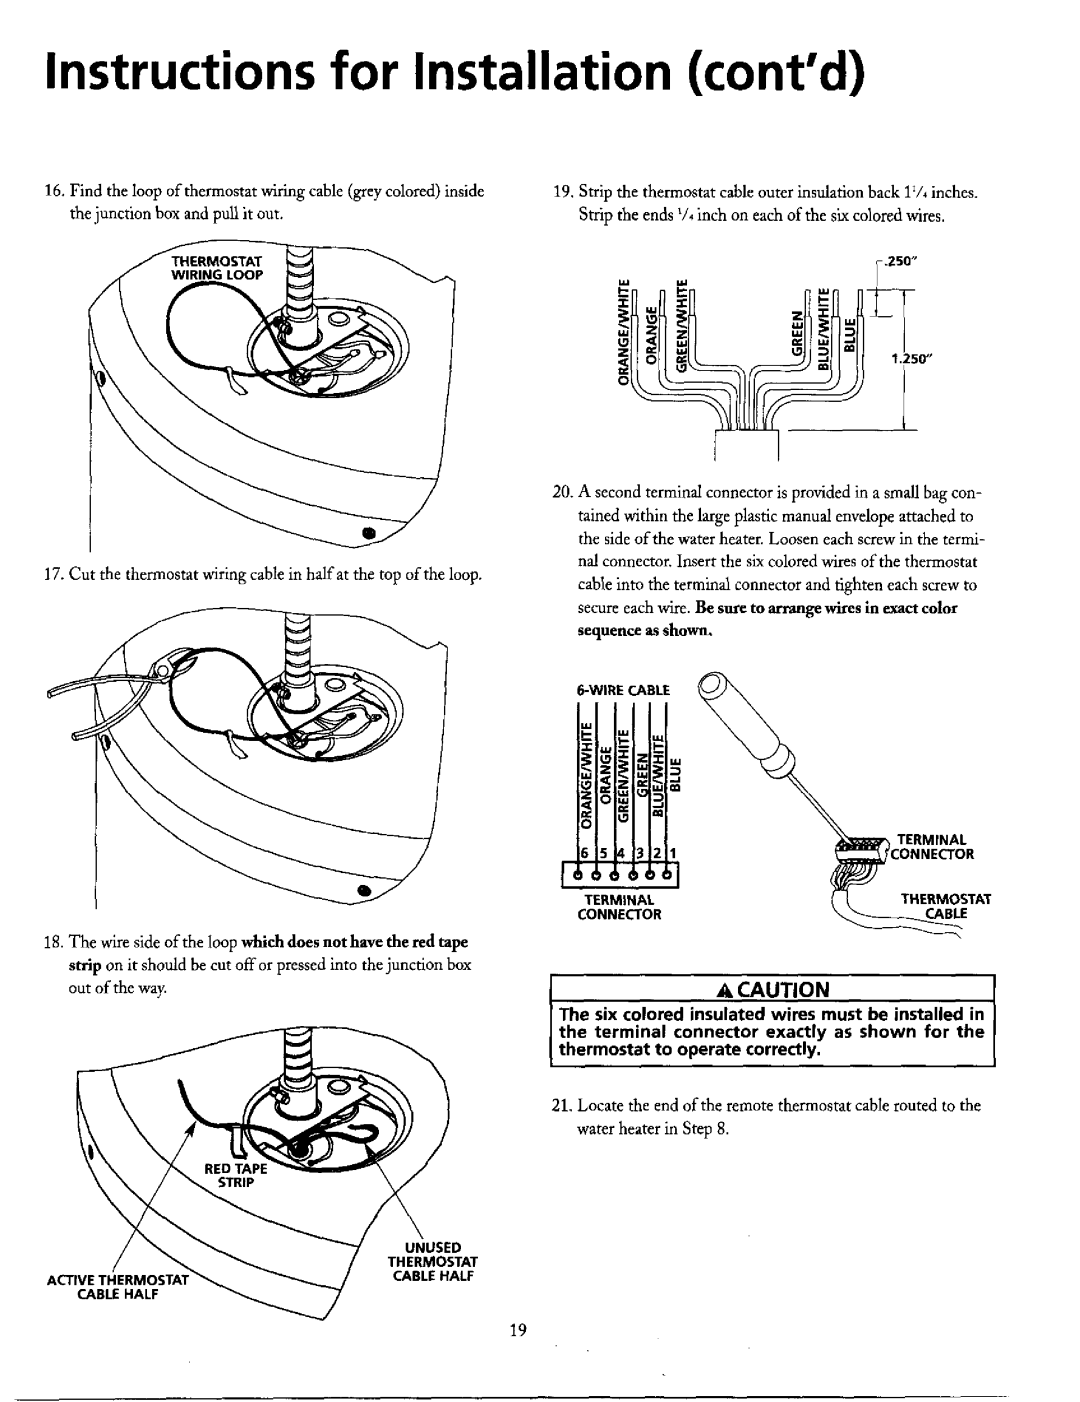 Maytag HE21282PC Instructions for Installation contd, Wircaele, ACTIc, Acaution, thermostat to operate correctly 